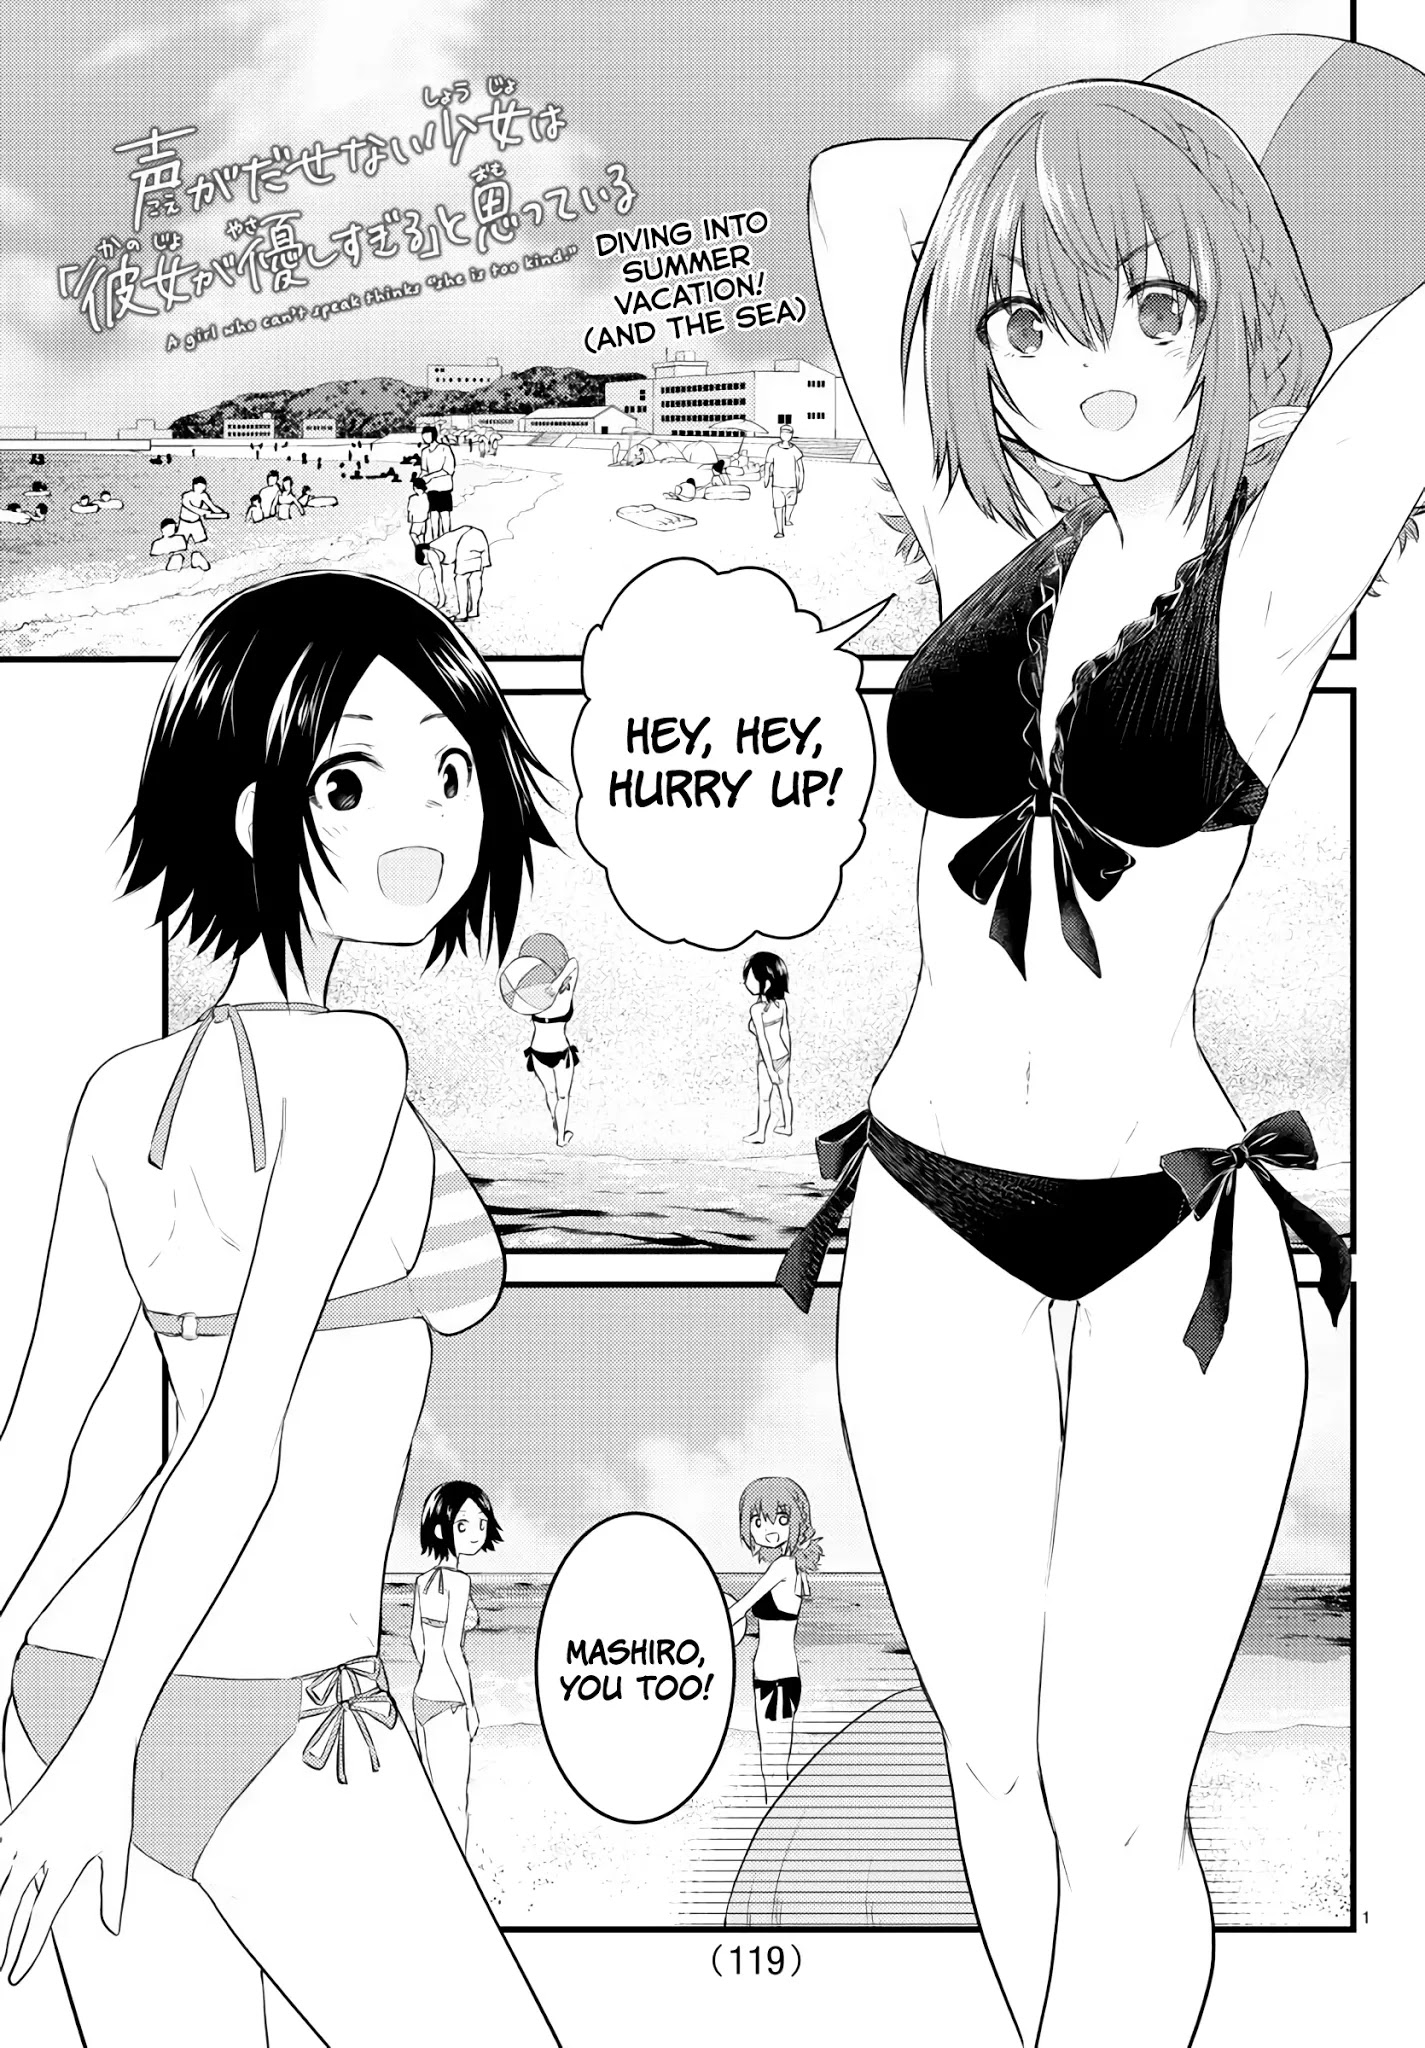 The Mute Girl And Her New Friend (Serialization) Chapter 18: Mashiro And The Sea - Picture 1